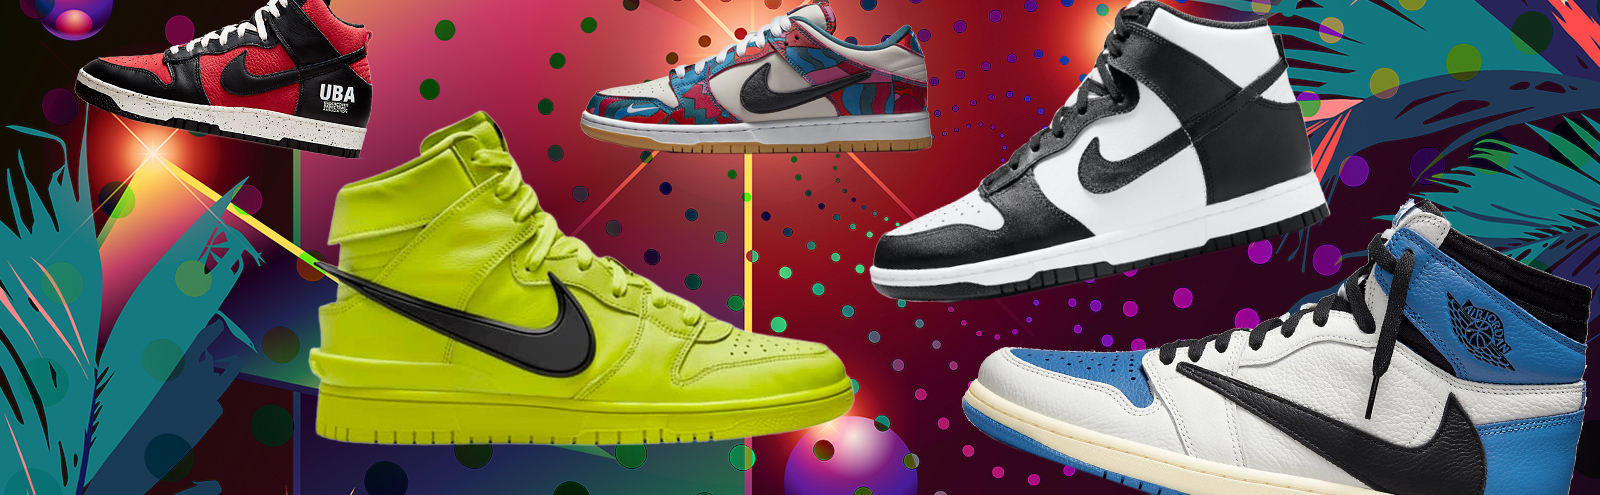 Dunk Shoes Wallpapers - Wallpaper Cave